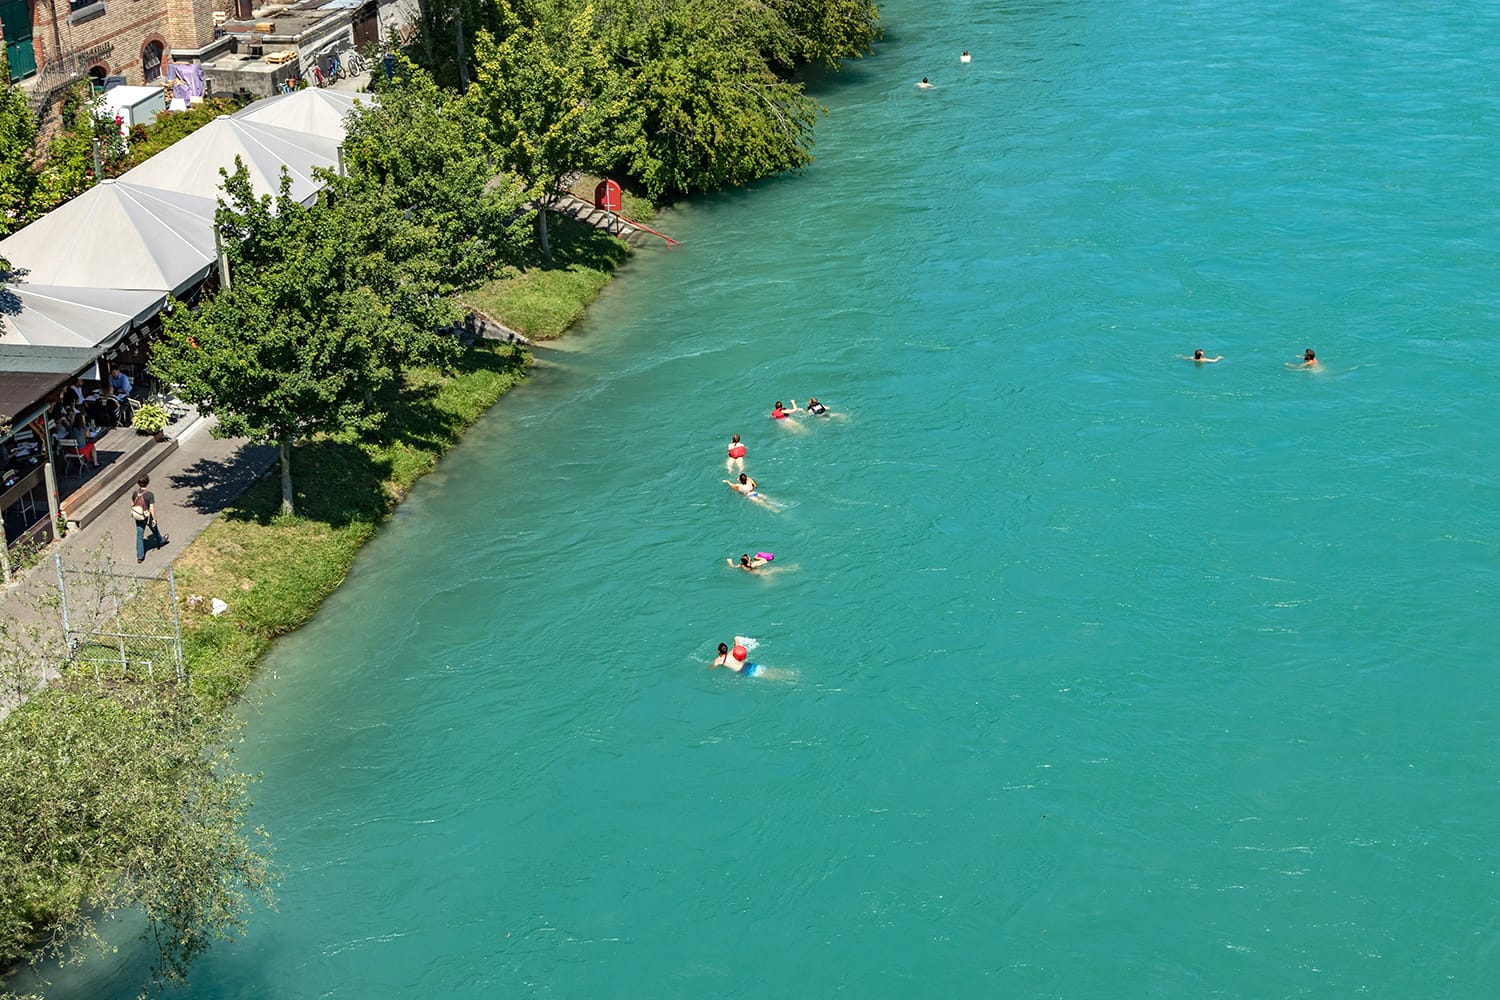 View of Aare river at sunny summer day. Local residents relax, sunbathe and rafting in inflatable boats along the fast flow of the river.